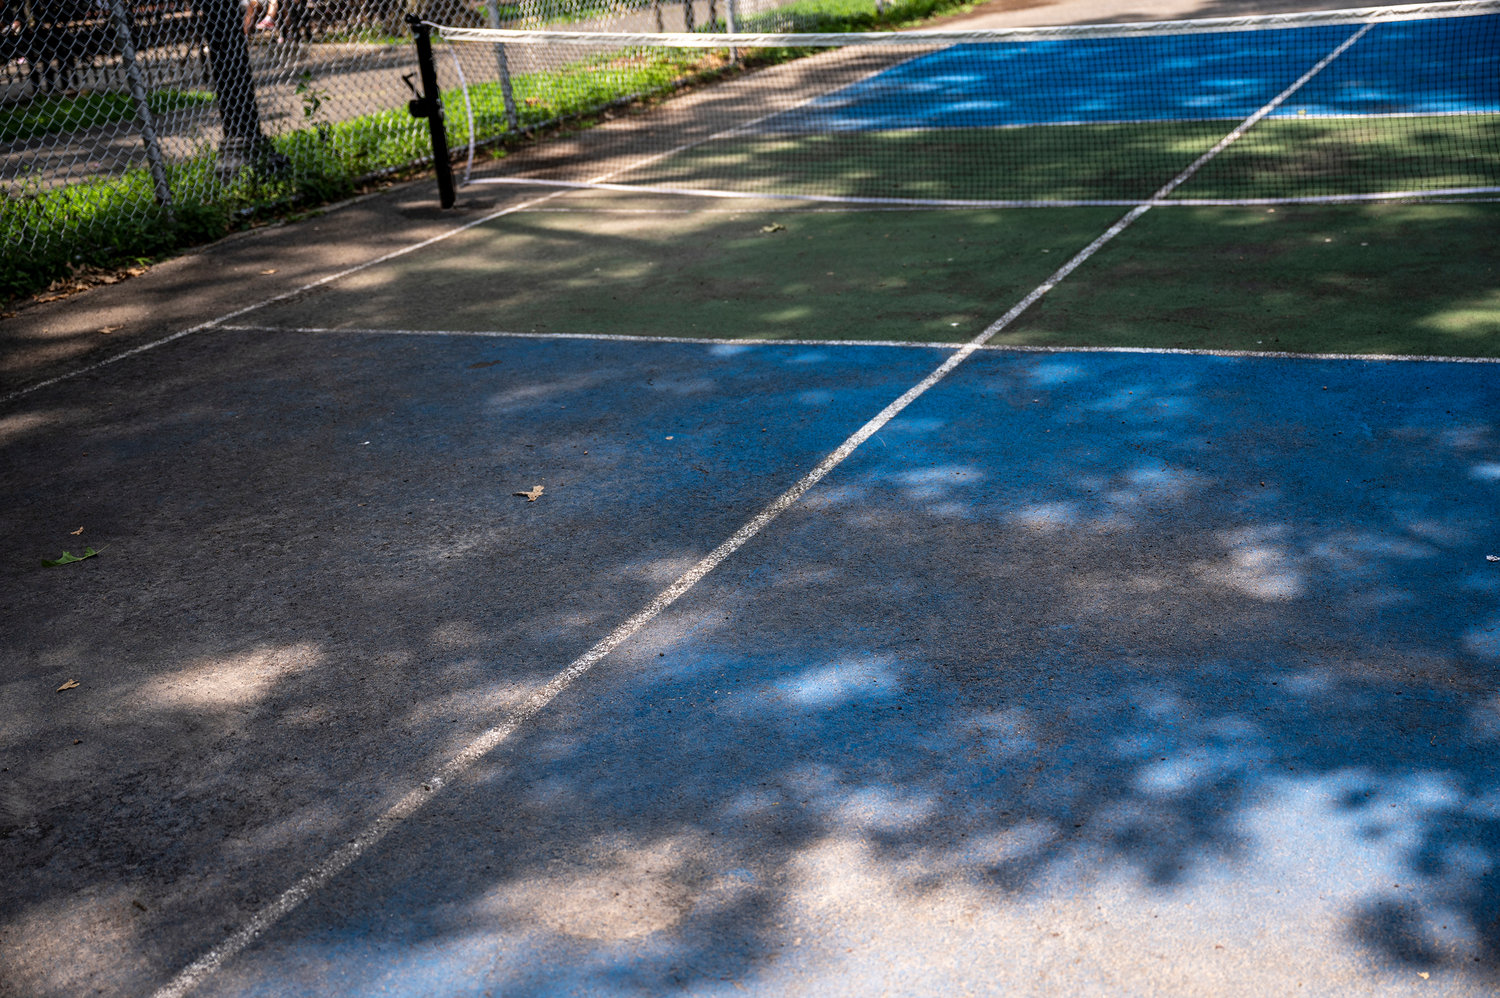 Alex Rosenblum, a northwest Bronx resident, found that the pickleball court in Van Cortlandt Park was an embarrassment. There is only a low net, with no borders.